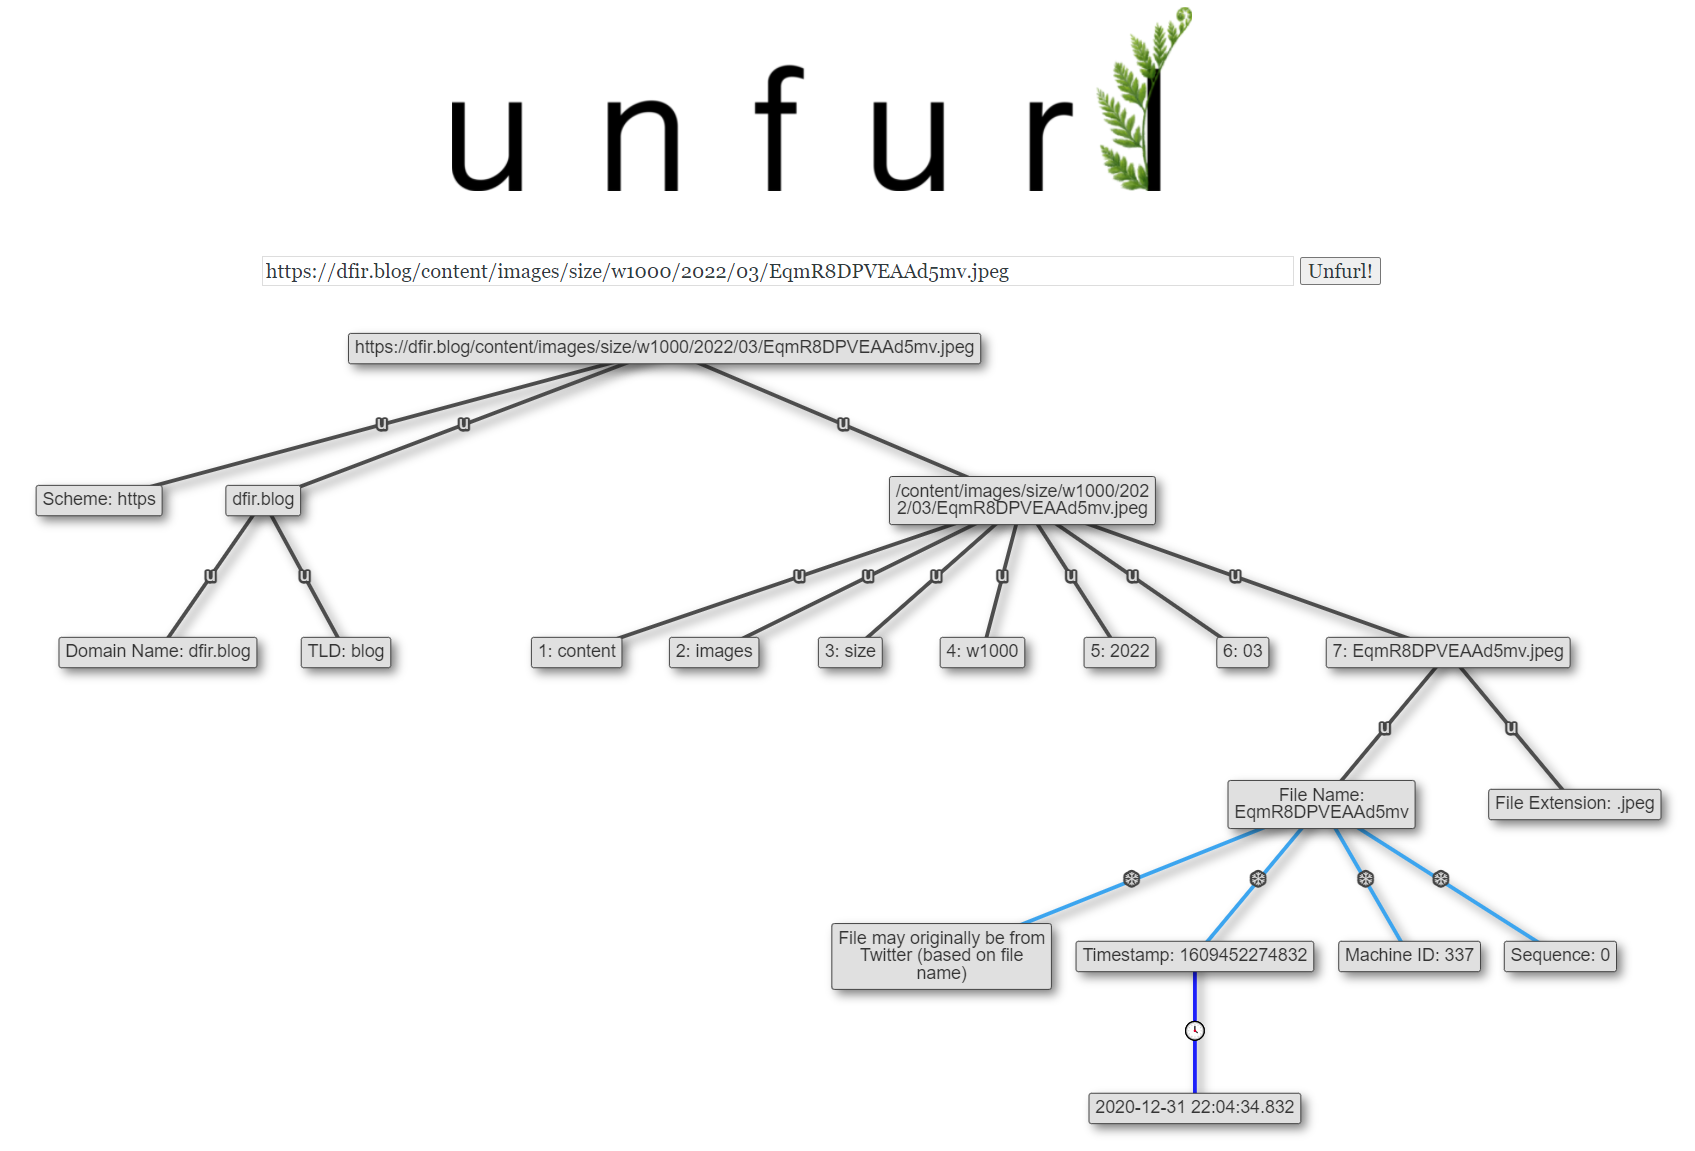 More Search URL Parsing, MISP Lists, & More in Unfurl v2022.02